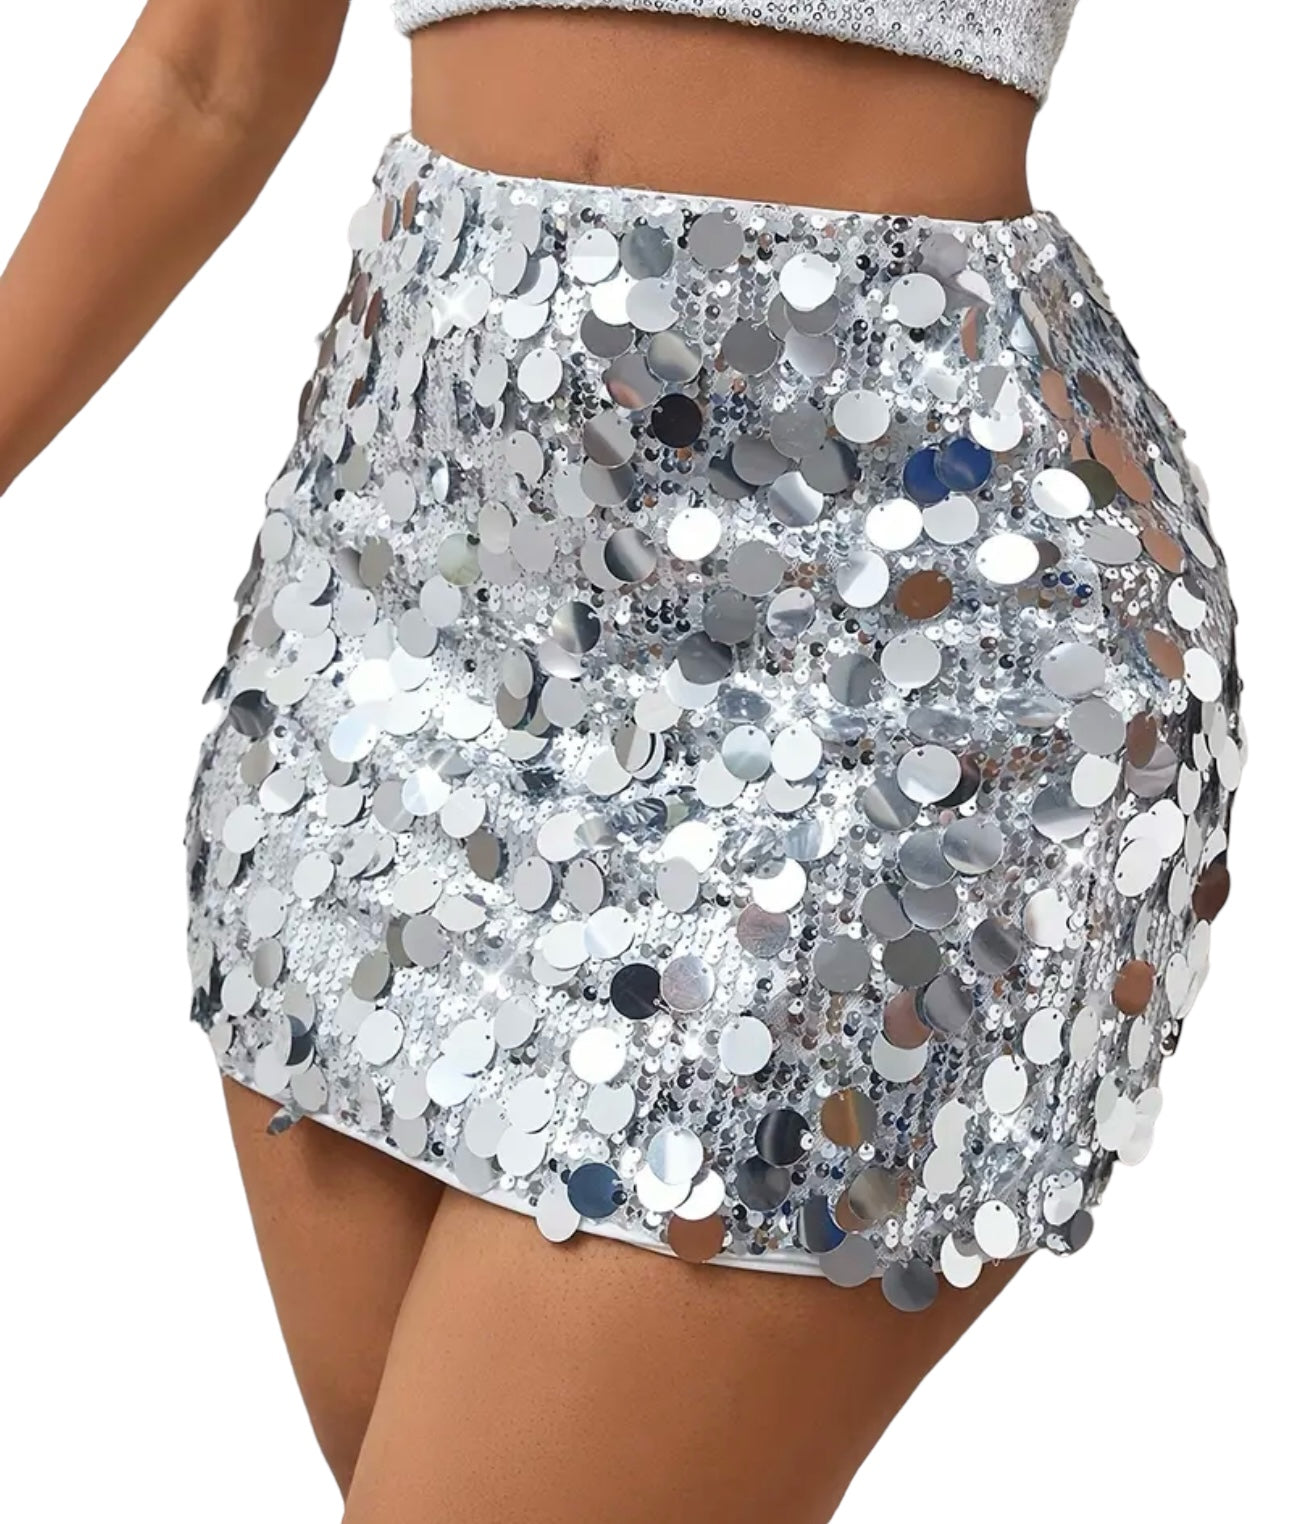 Baddies Bodycon Shimmering Mini Skirt, Sexy High Waist For Party & Club.